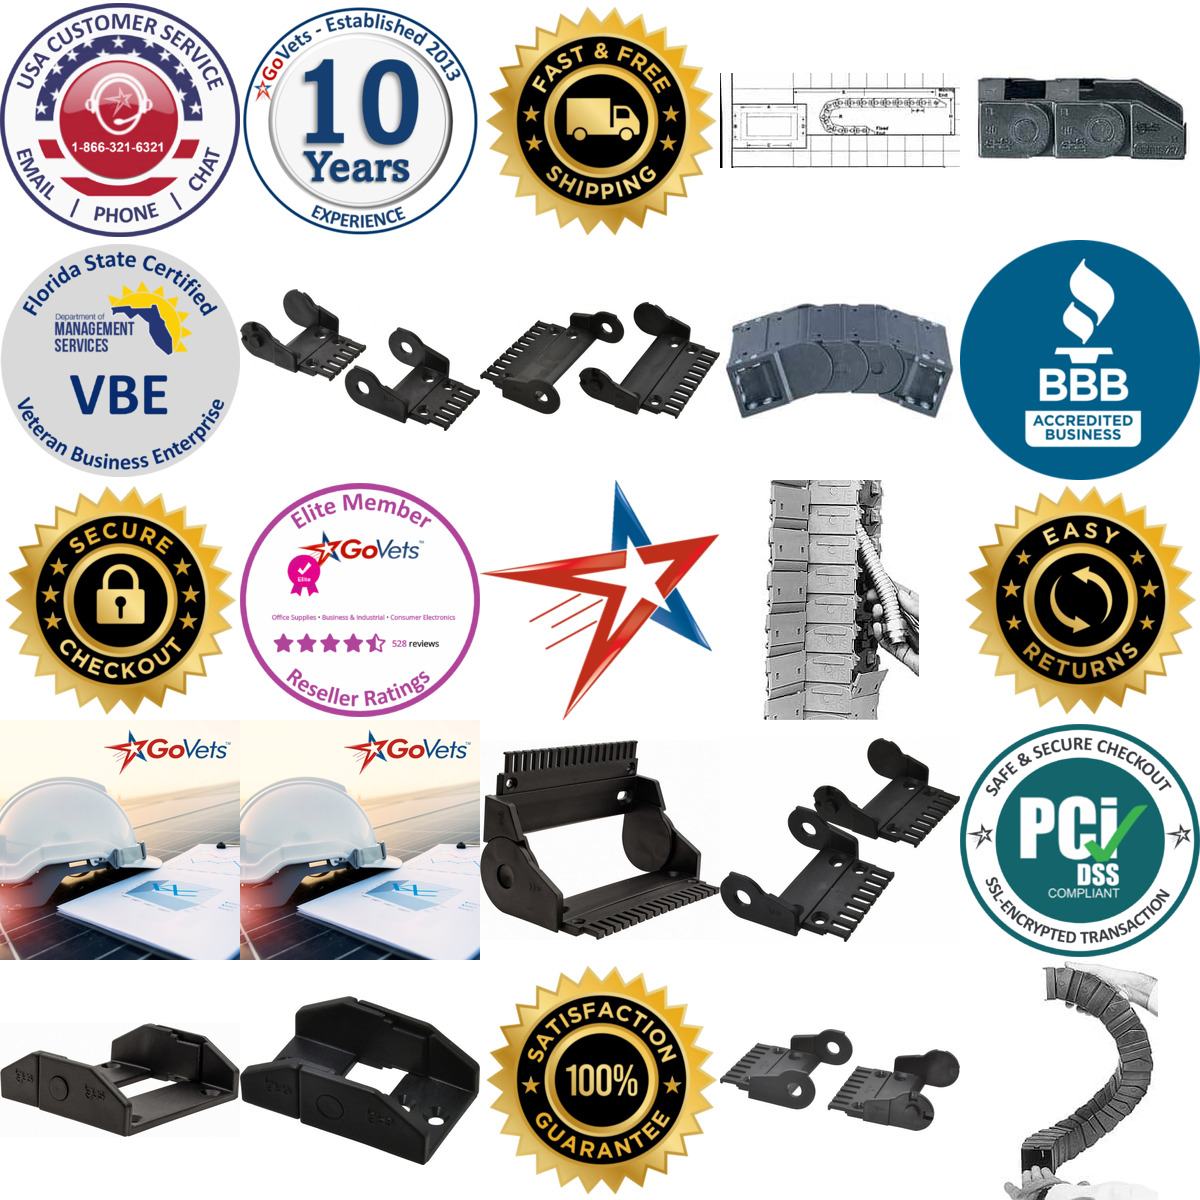 A selection of Igus products on GoVets